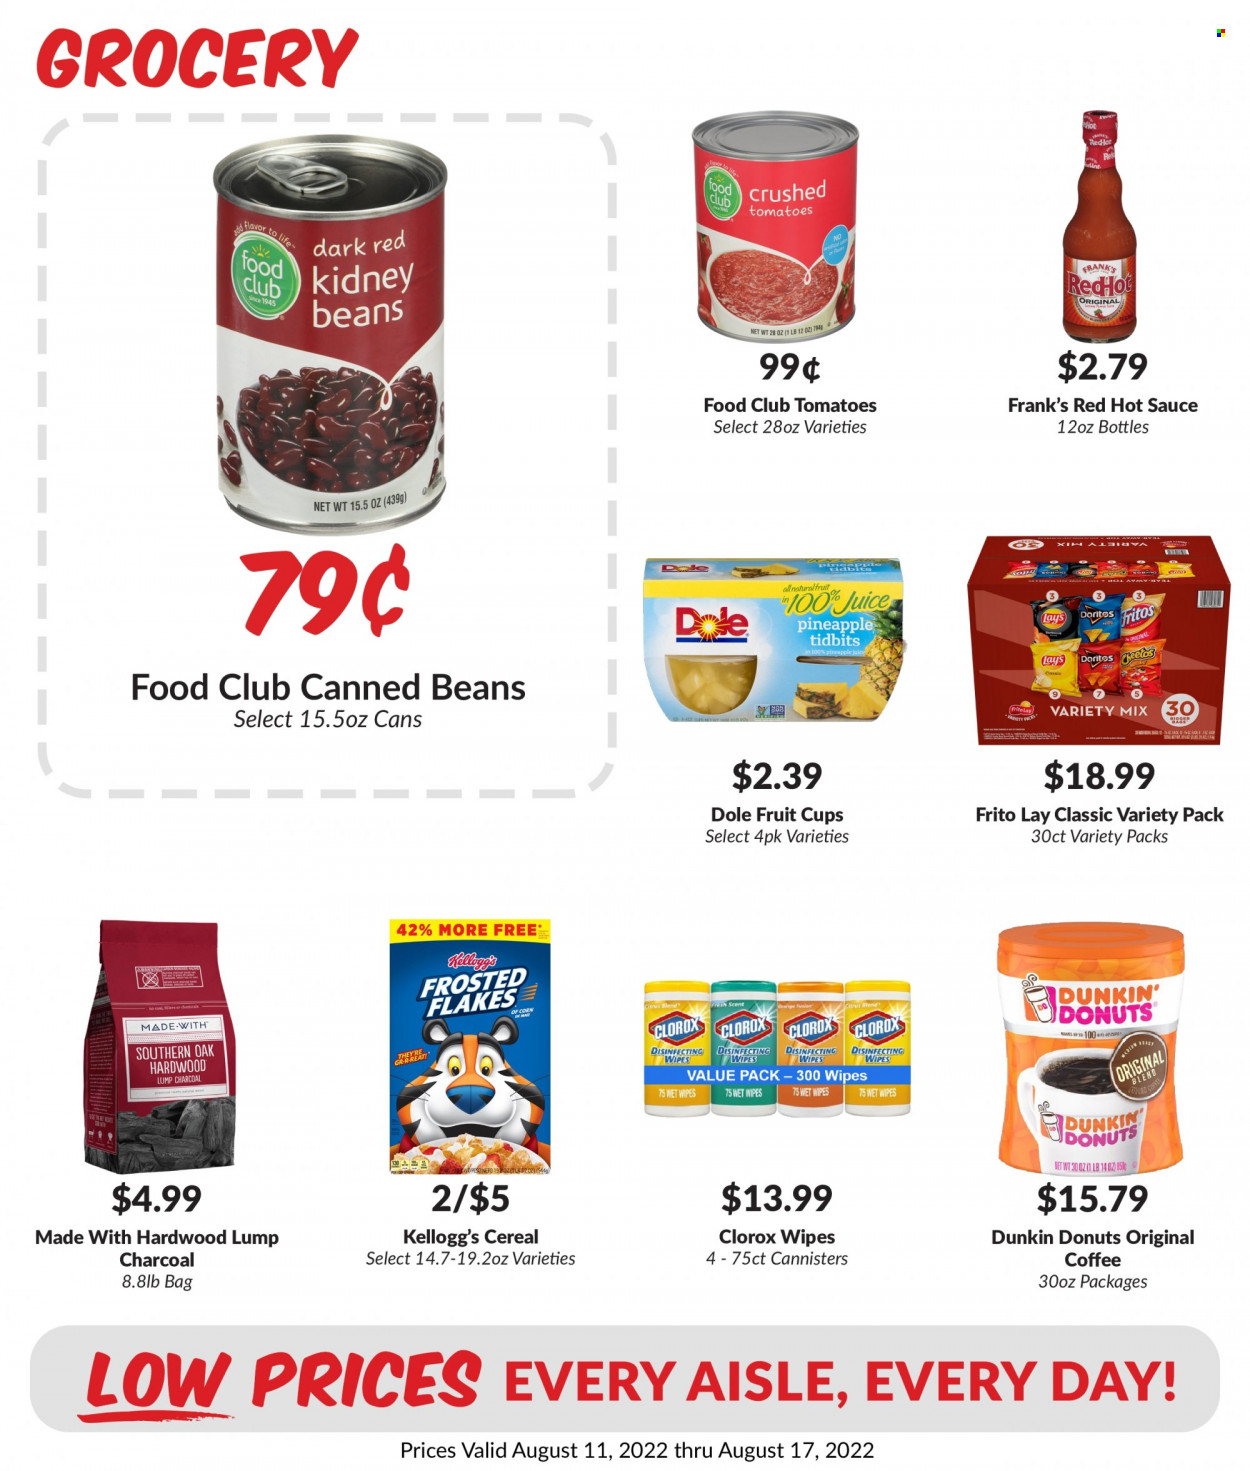 thumbnail - Woodman's Markets Flyer - 08/11/2022 - 08/17/2022 - Sales products - donut, tomatoes, Dole, pineapple, fruit cup, sauce, Kellogg's, Doritos, Fritos, Cheetos, Lay’s, kidney beans, cereals, Frosted Flakes, hot sauce, pineapple juice, juice, coffee, wipes, Clorox. Page 4.